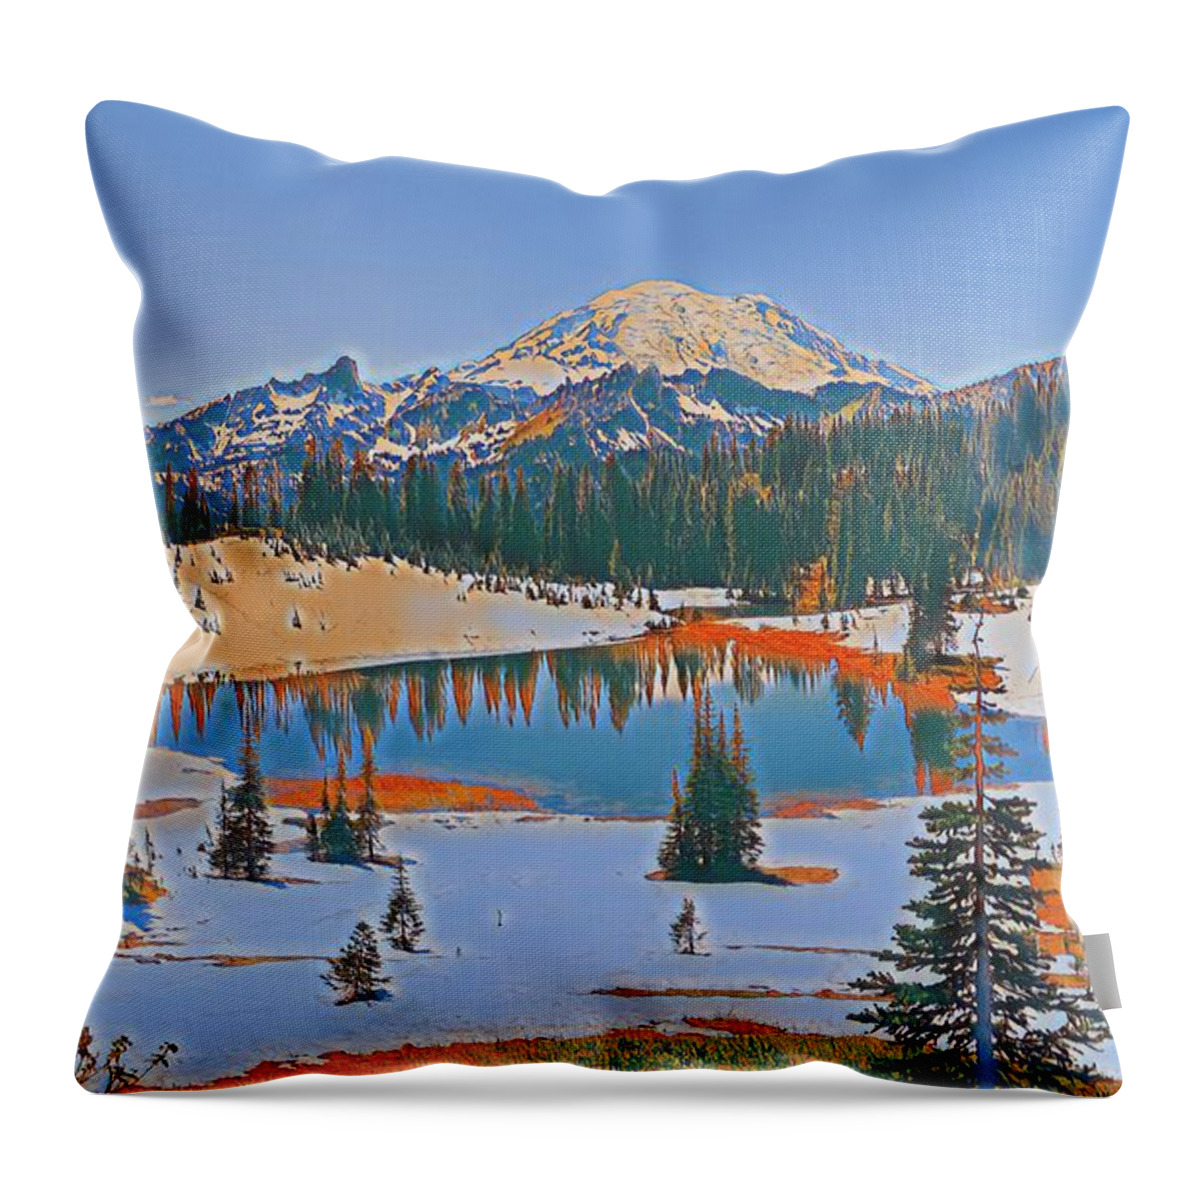 Mt. Rainier Throw Pillow featuring the digital art Tipsoo Lake by Jerry Cahill